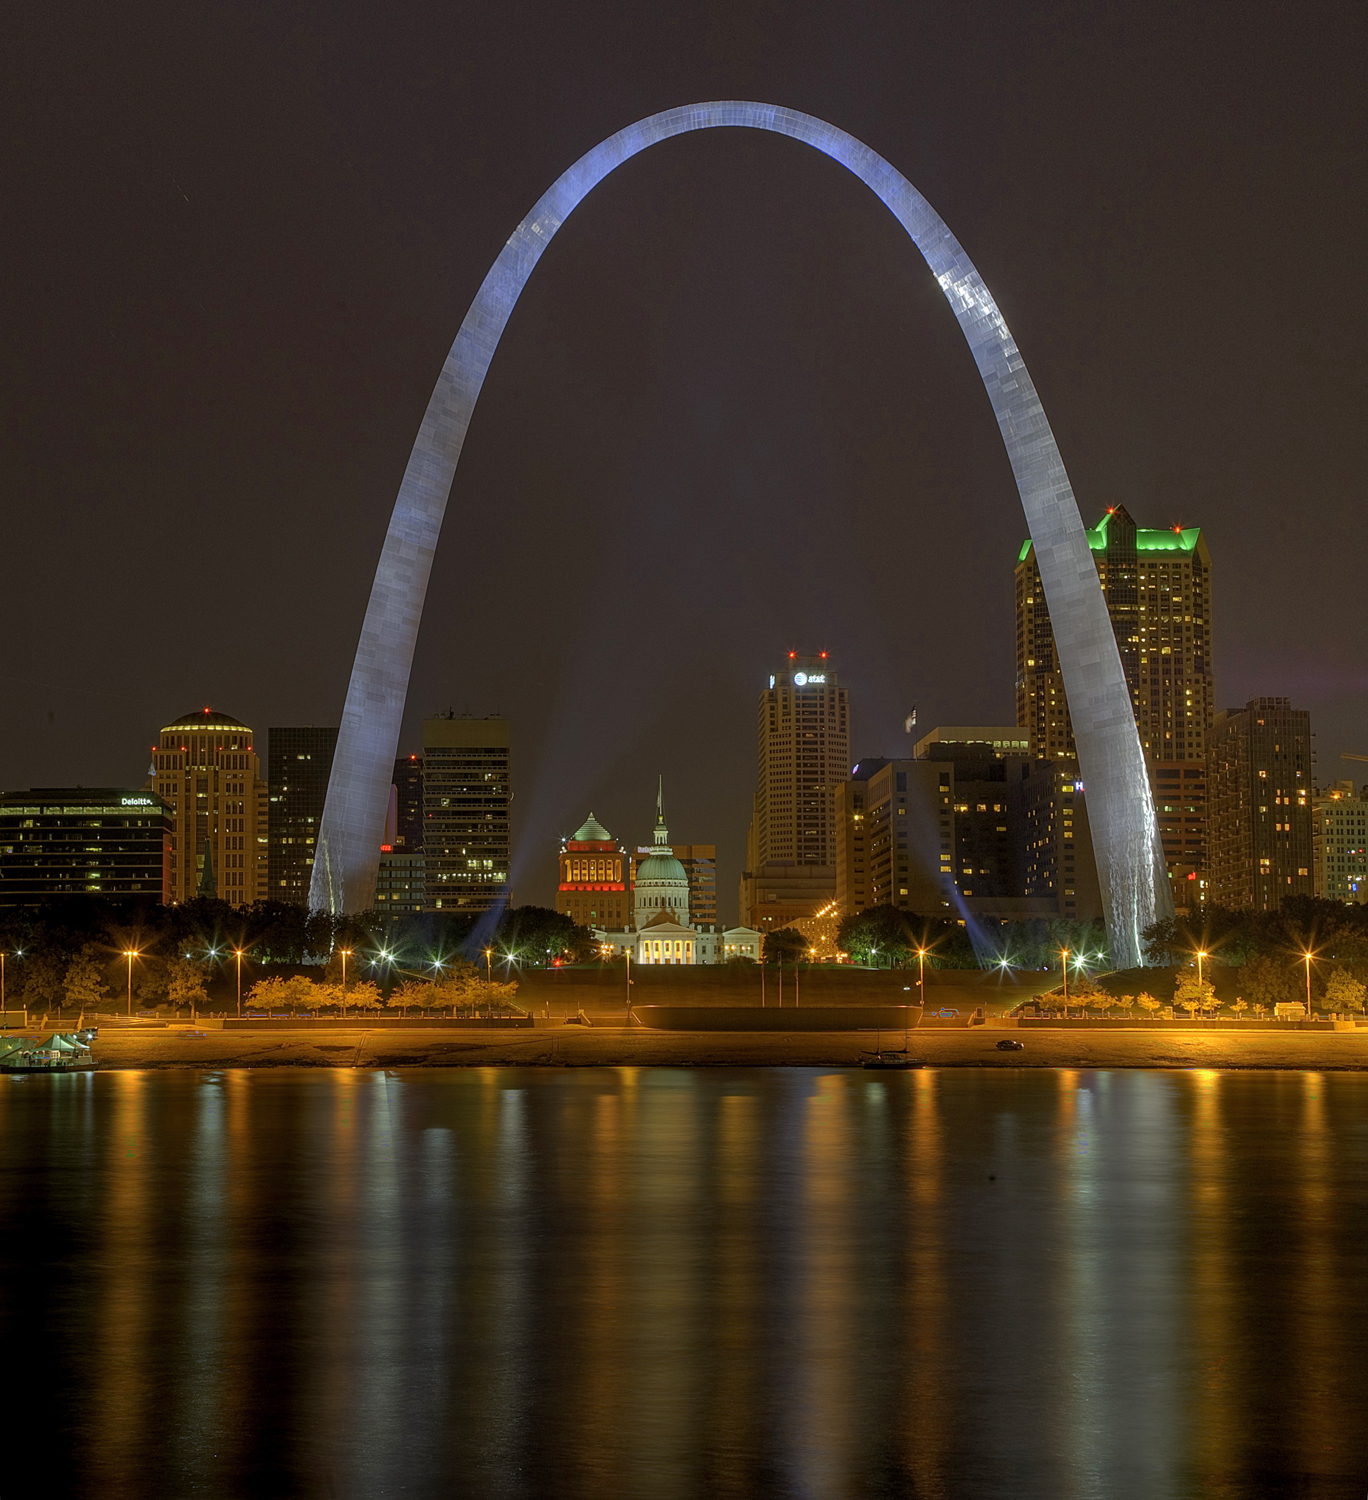 Meet me in St. Louis -- for a most sinful time! - wcy.wat.edu.pl